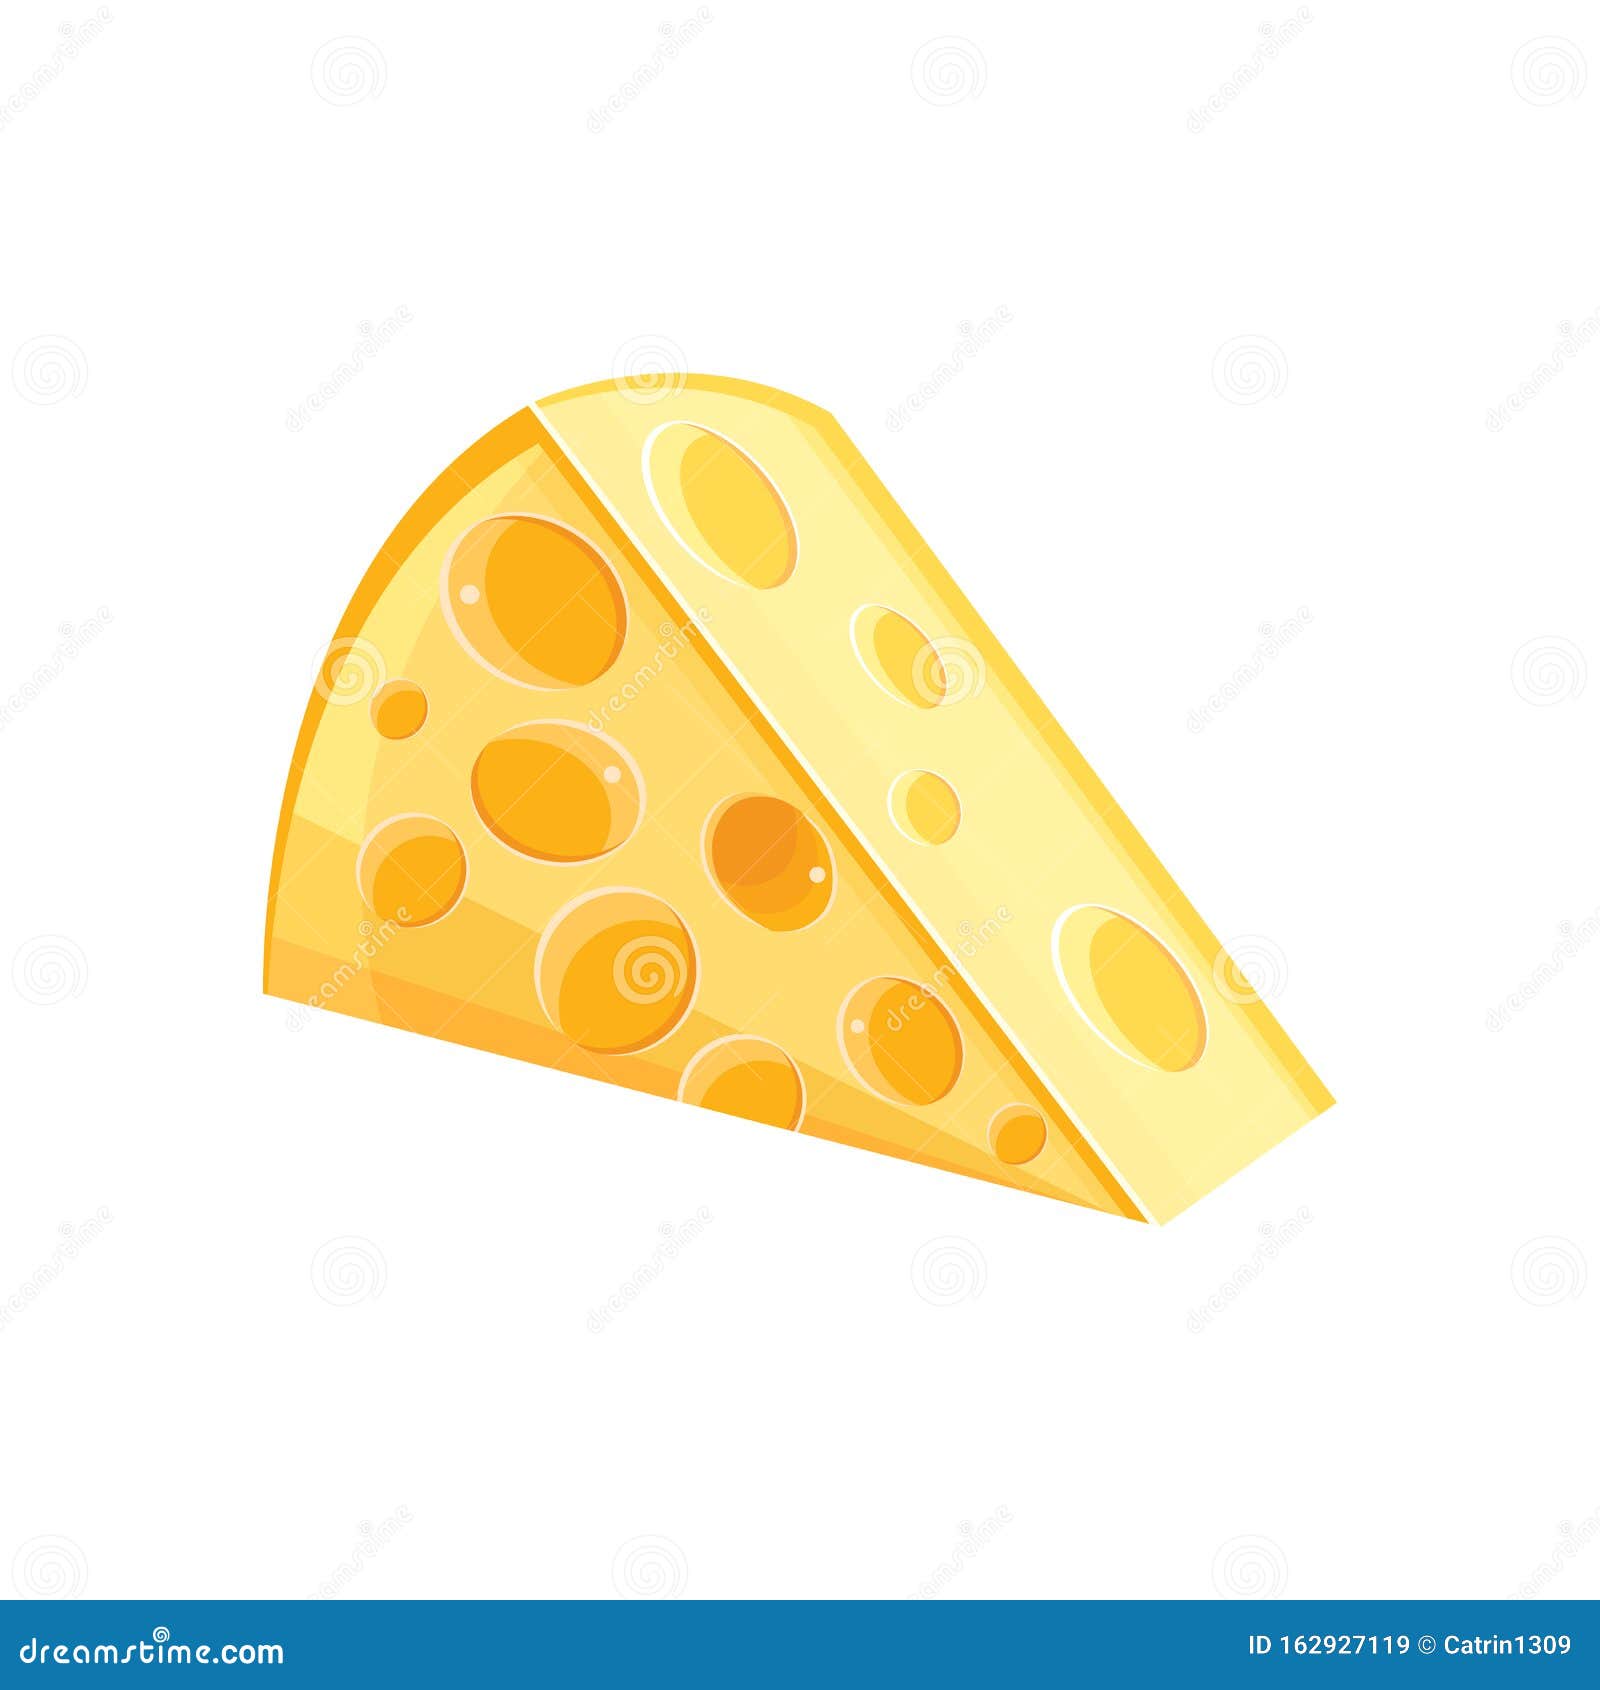 Cheese Cartoon Vector Icon Isolated on White Background. Flat Yellow Milk  Food Symbol for Web Site Design, Mobile App Stock Illustration -  Illustration of cheeses, isolated: 162927119